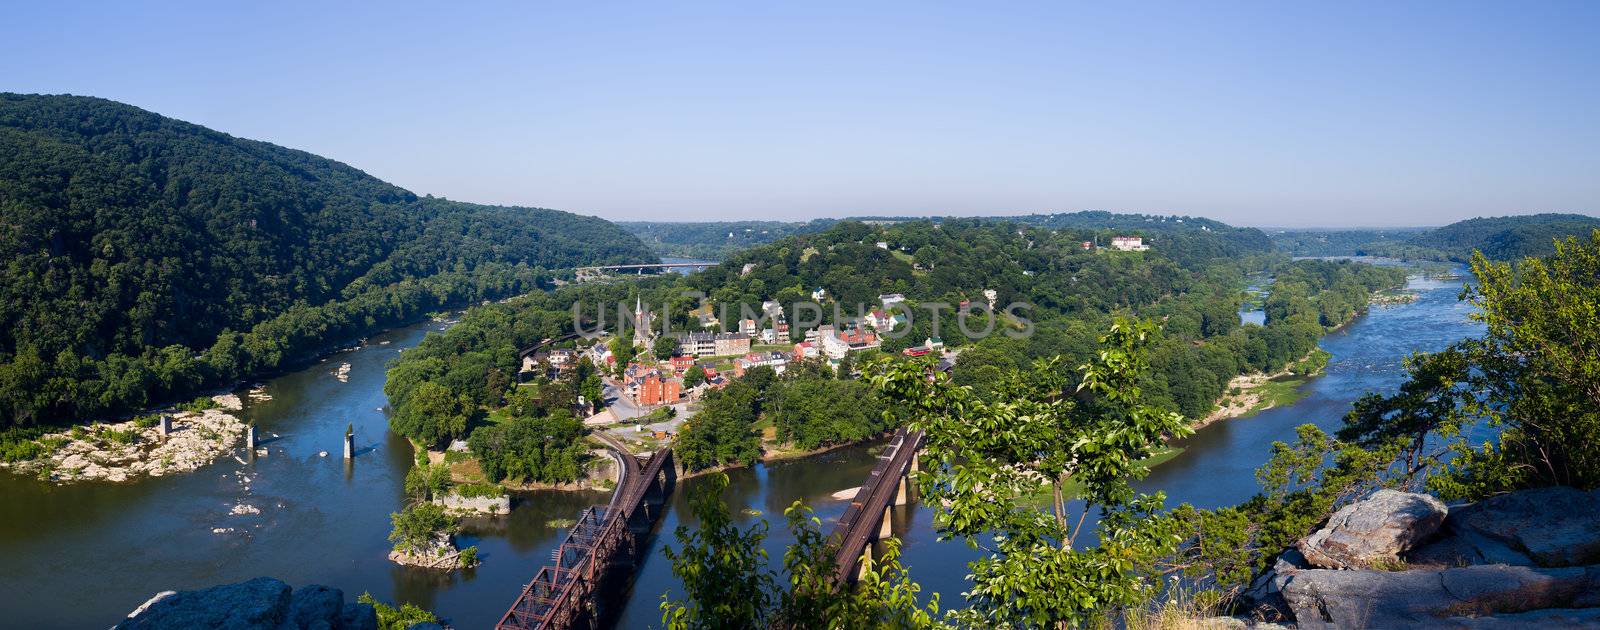 View over historical civil war town of Harpers Ferry, a National Park owned town, by the confluence of the Potomac and Shenandoah rivers